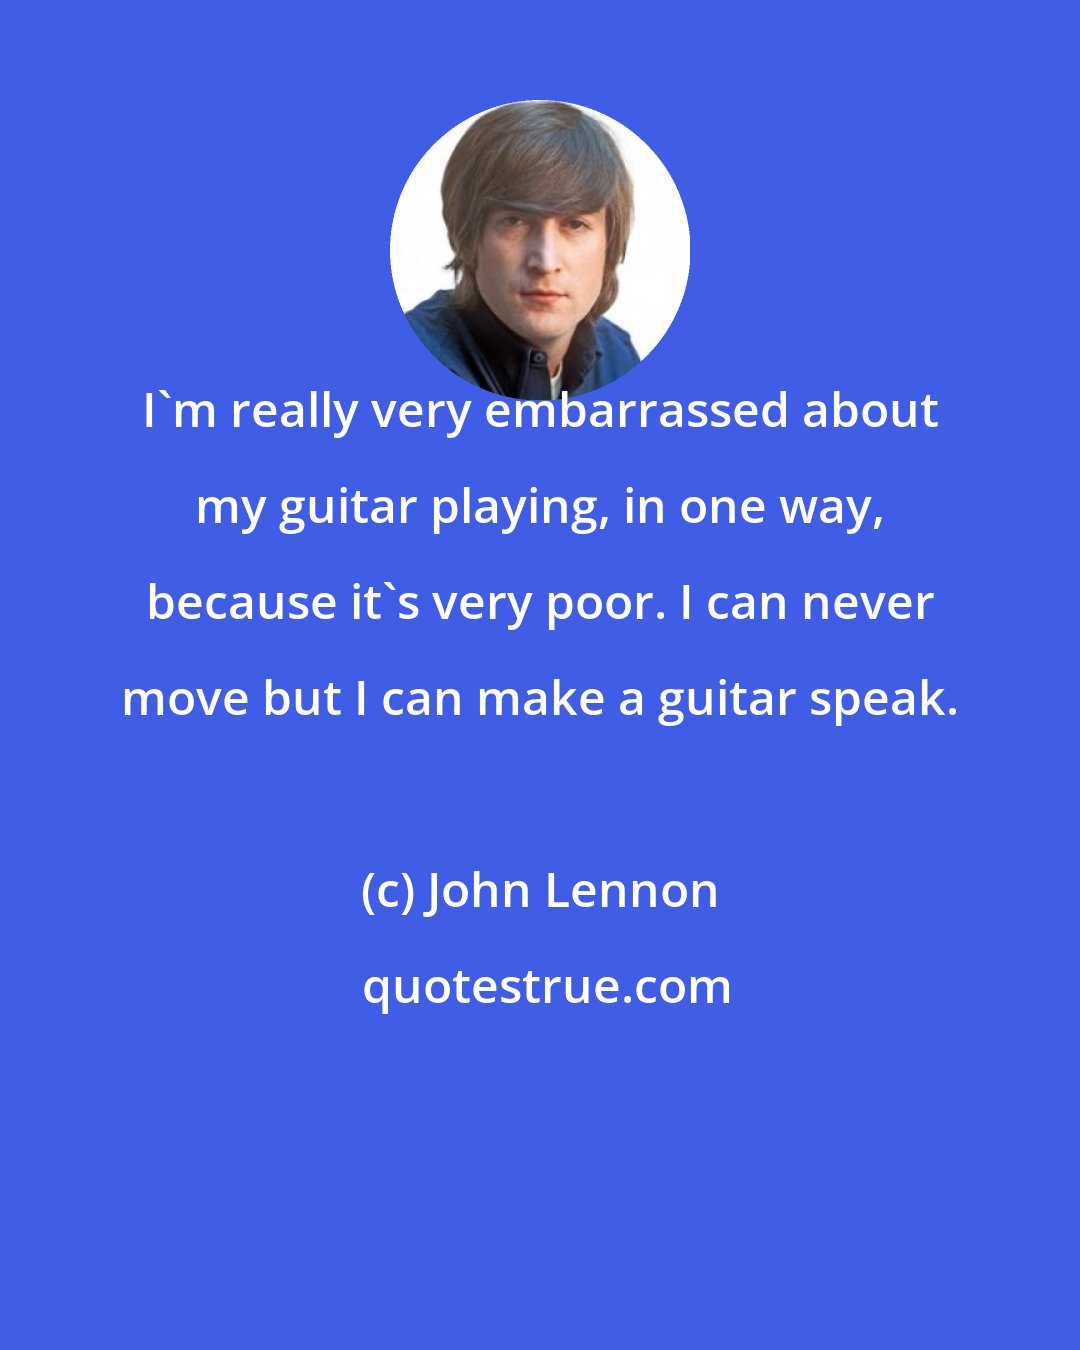 John Lennon: I'm really very embarrassed about my guitar playing, in one way, because it's very poor. I can never move but I can make a guitar speak.